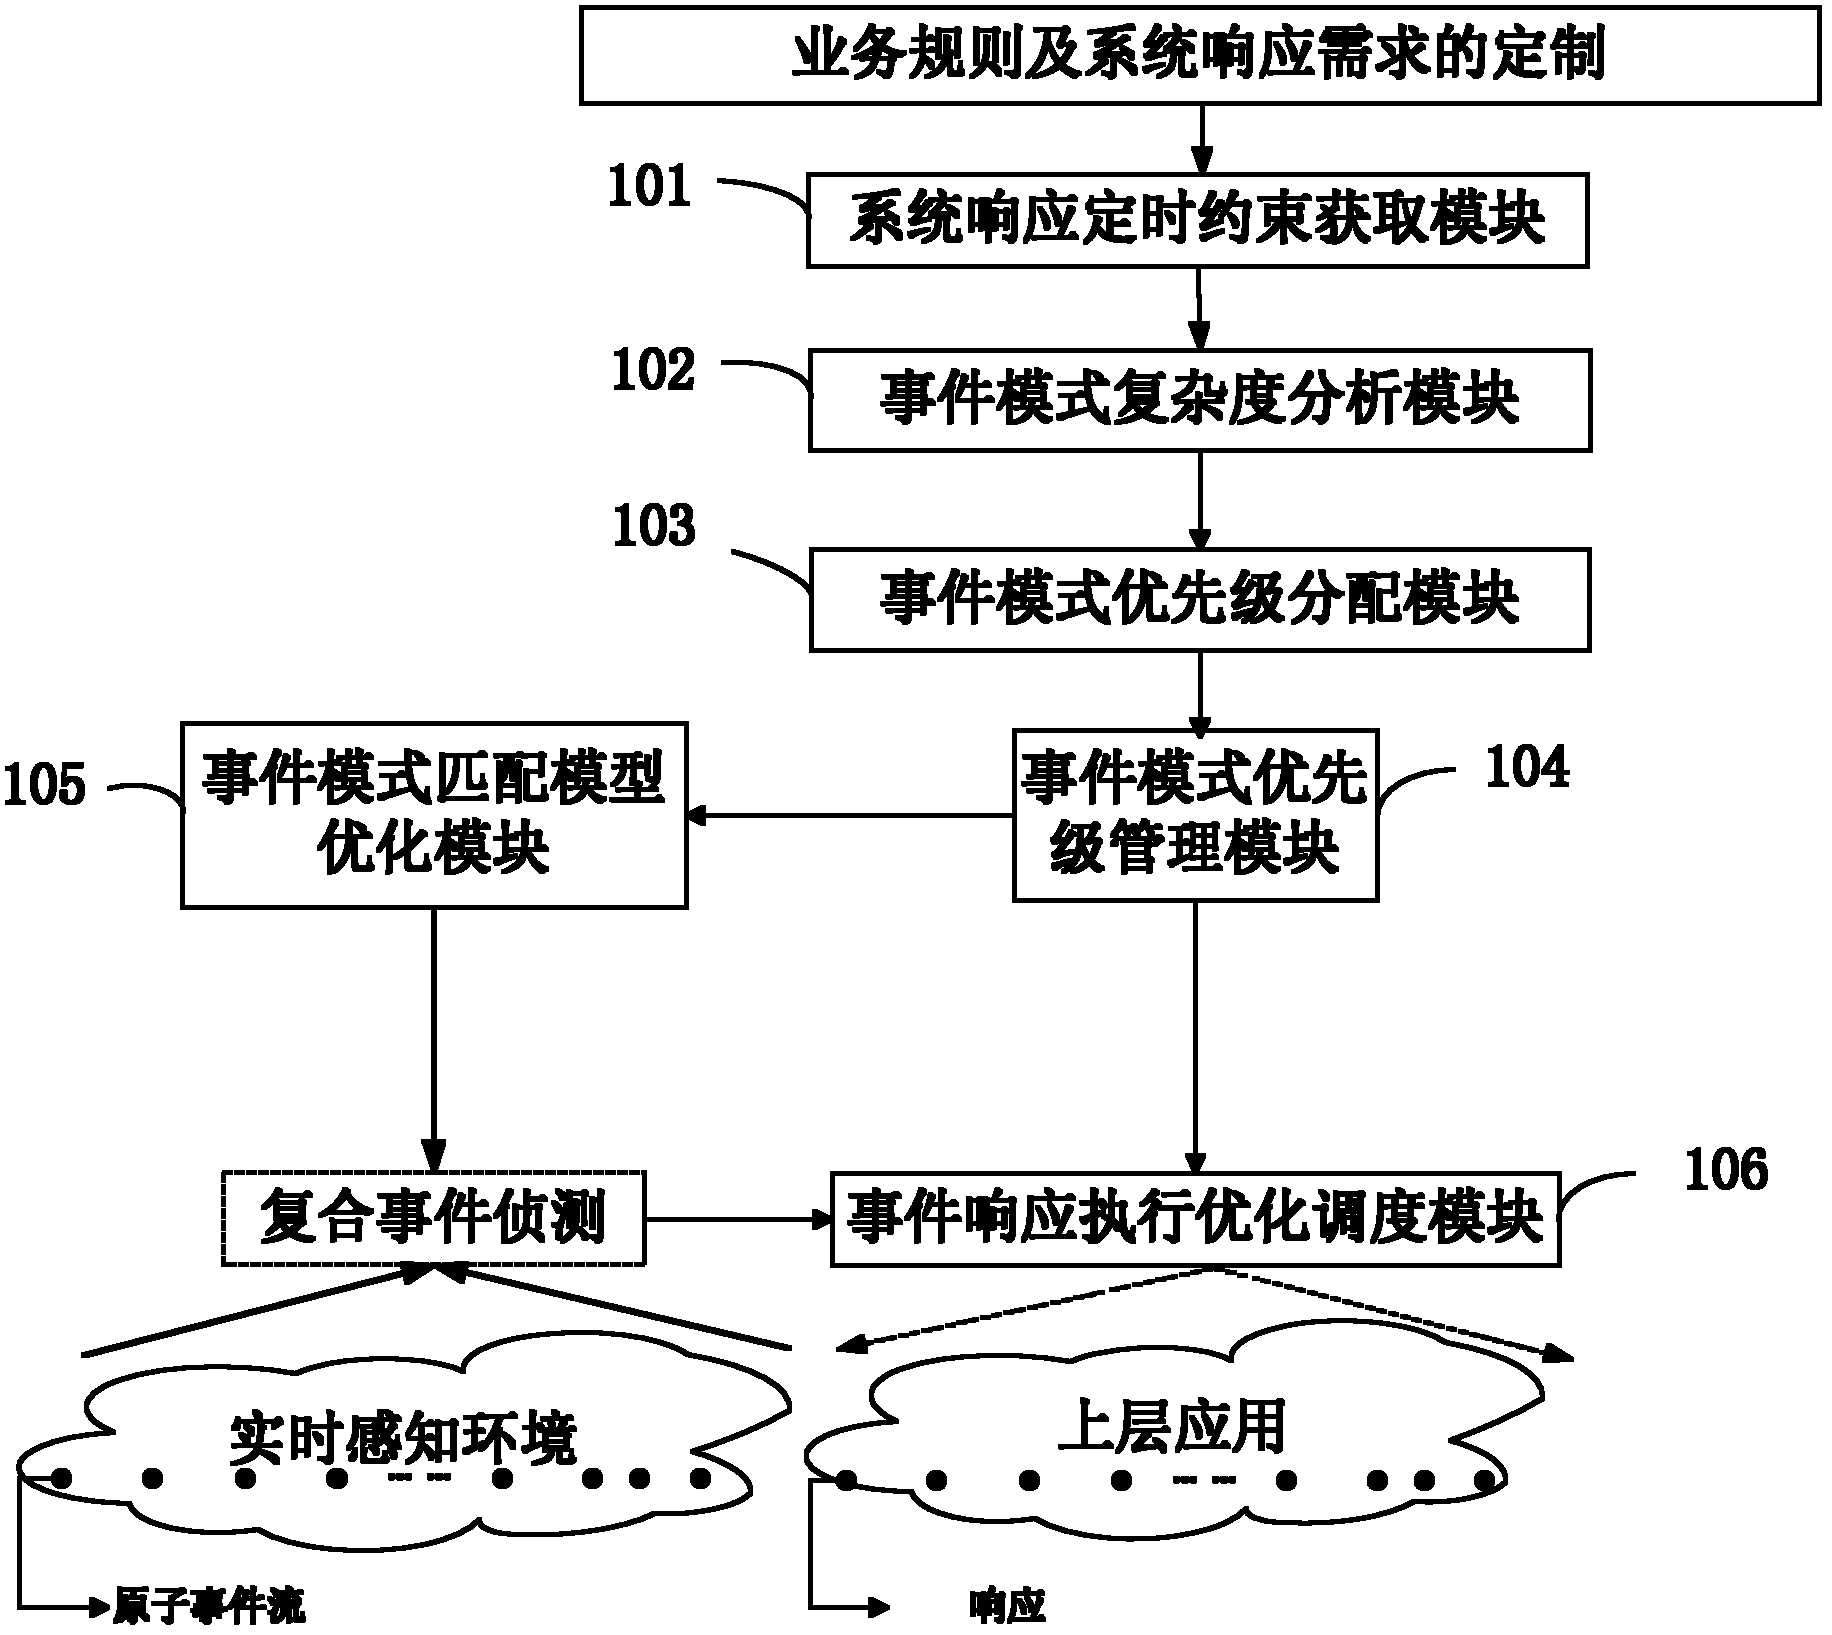 Composite event detection method and system for real-time perception environment